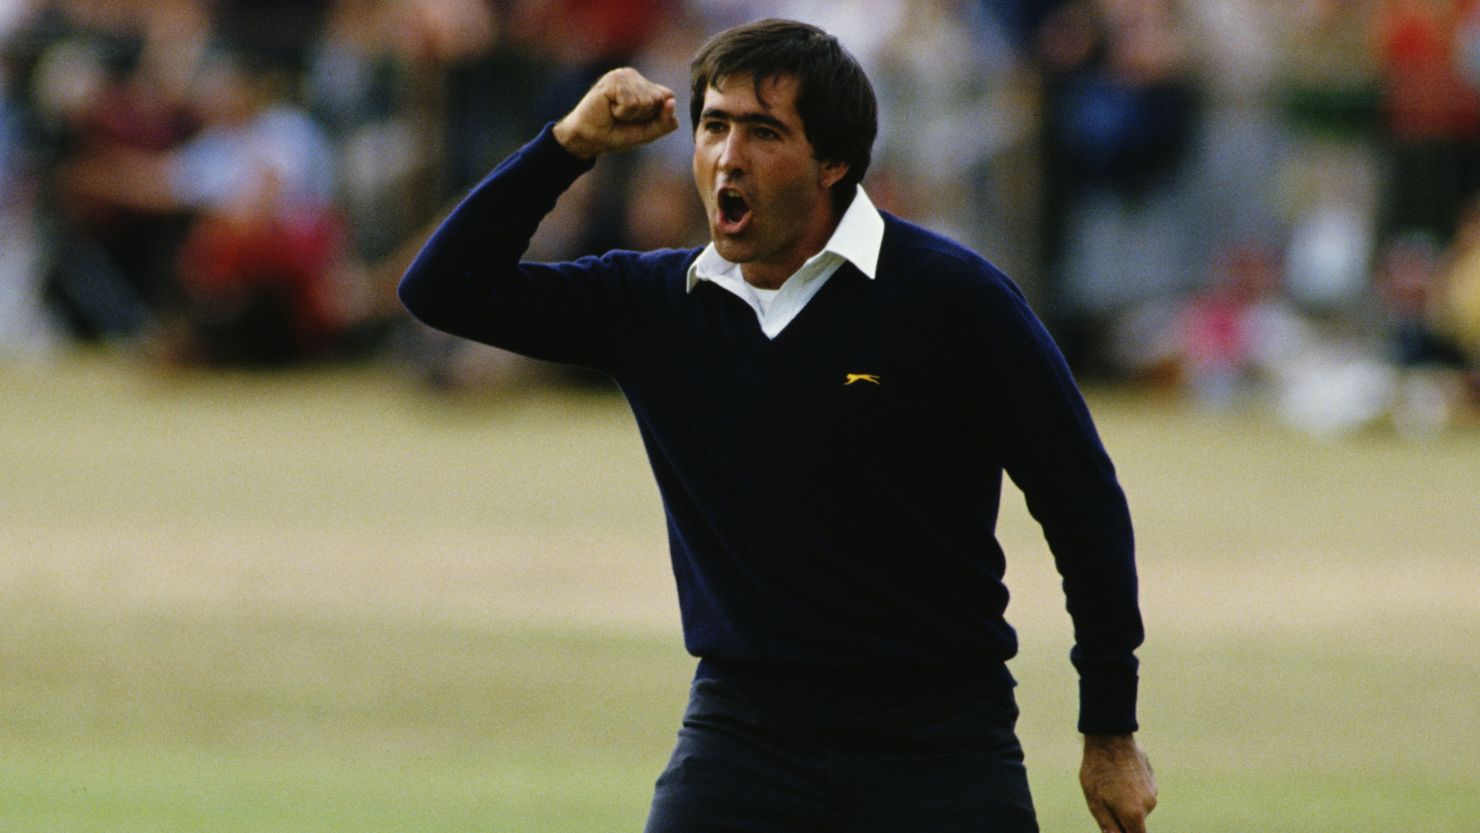 Seve Ballesteros celebrates on the 18th green after winning the 113th Open Championship on 22nd July 1984 at St Andrews.